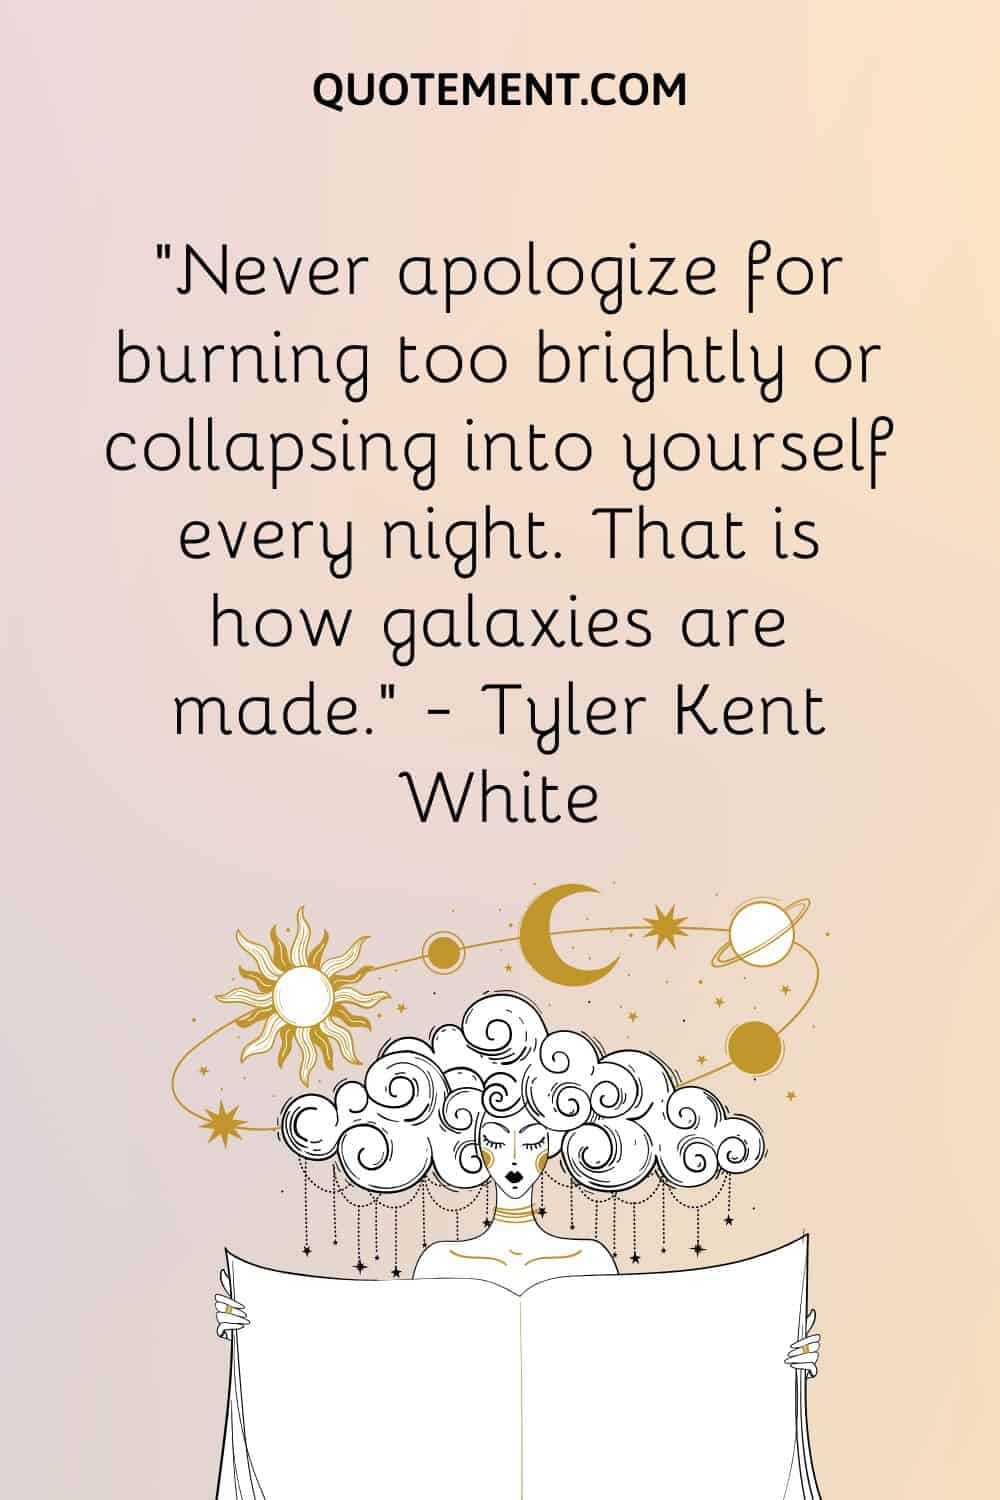 Never apologize for burning too brightly or collapsing into yourself every night